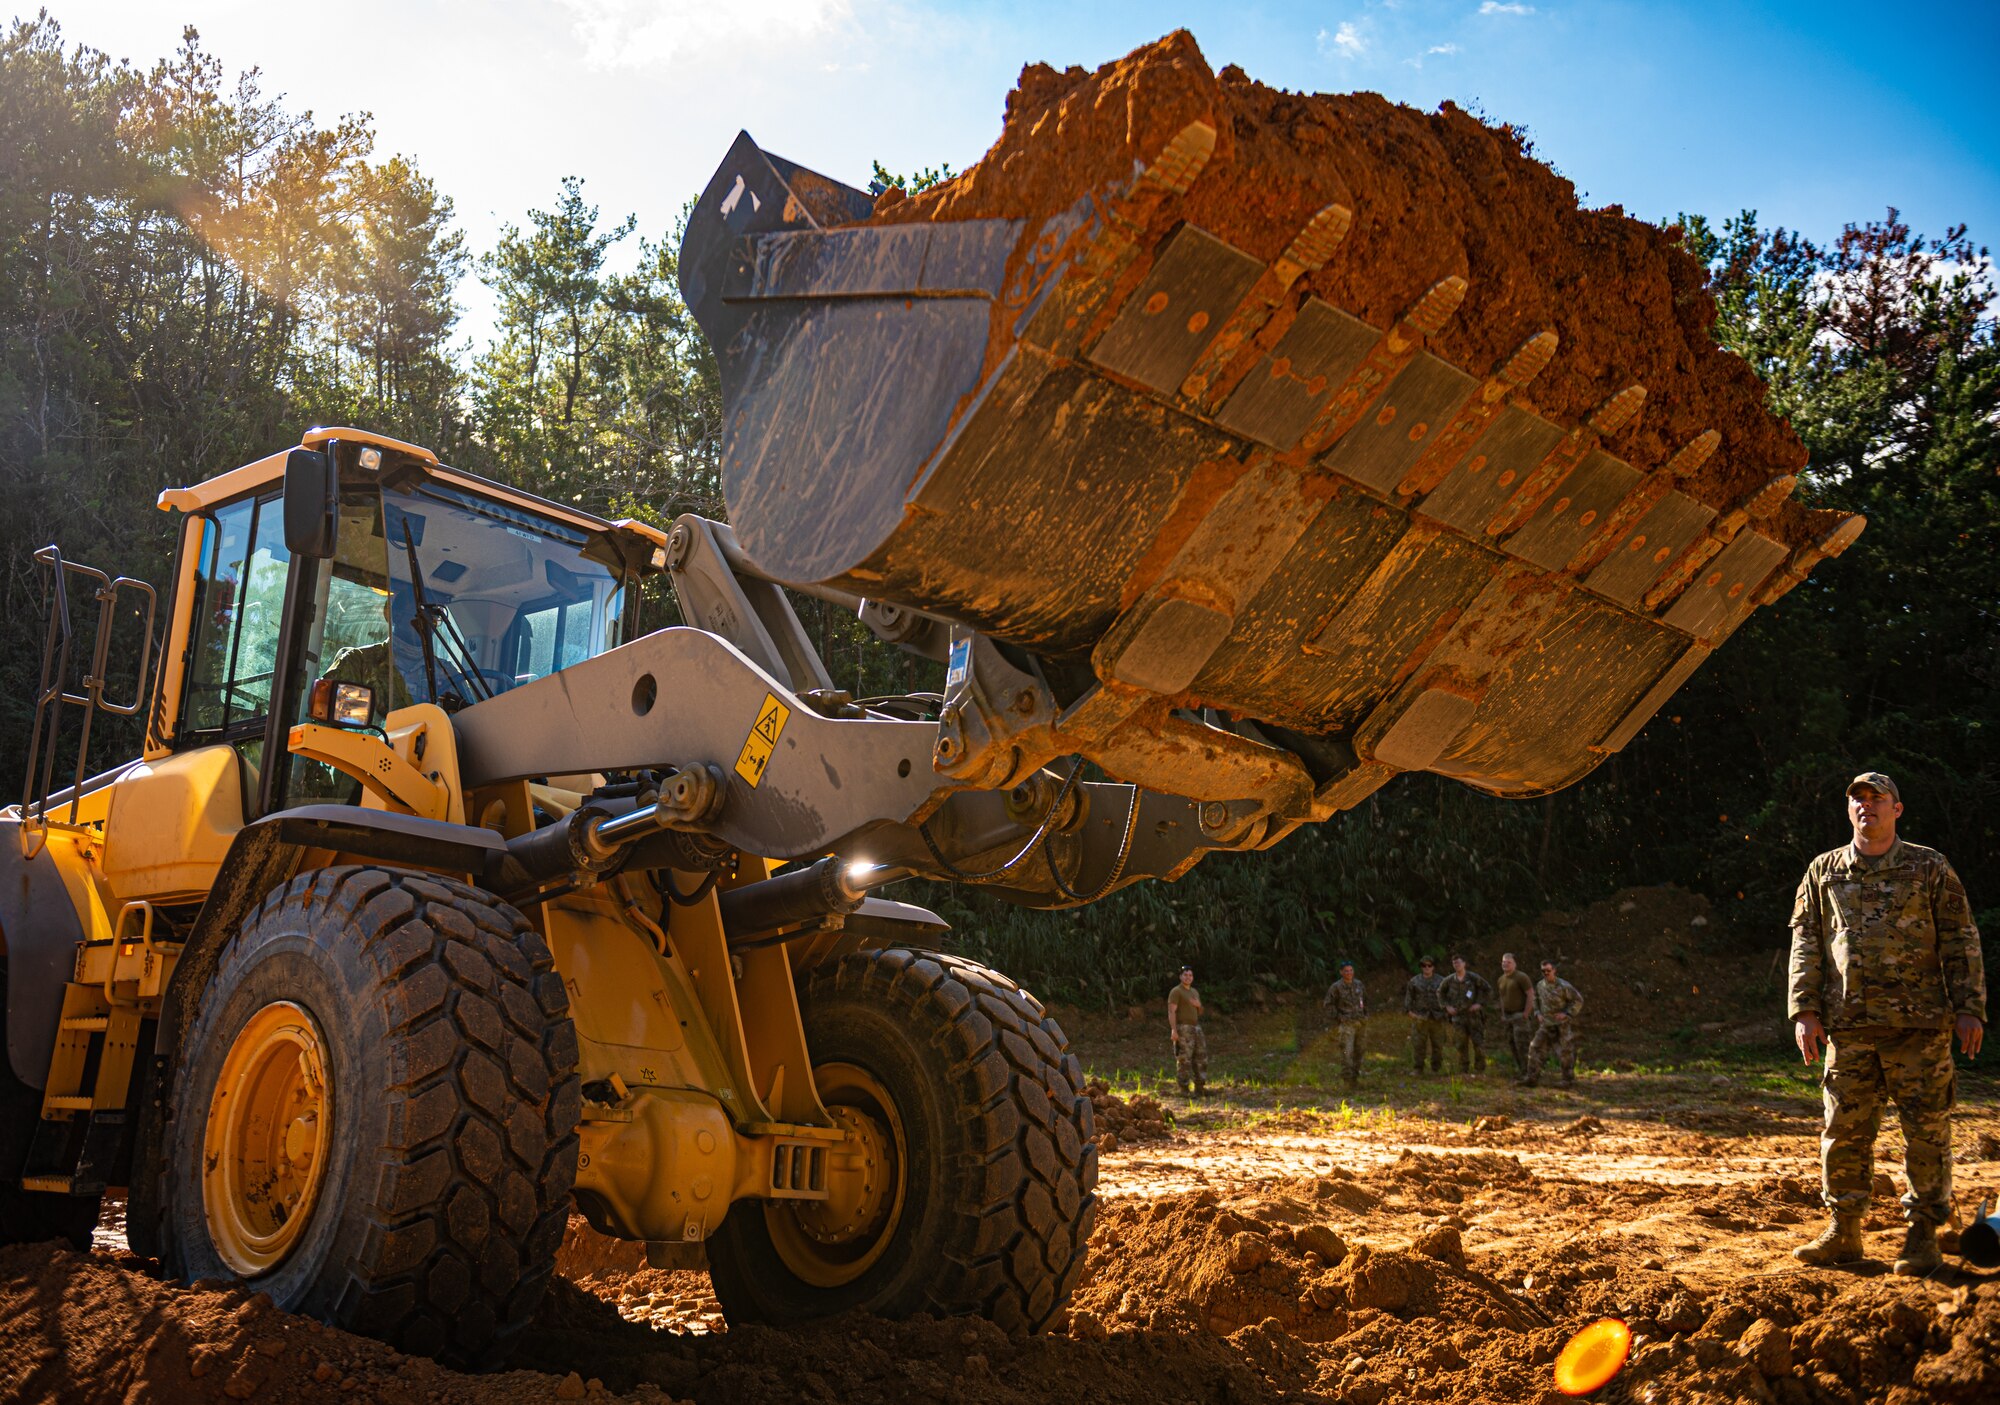 An Airman operates a front end loader.